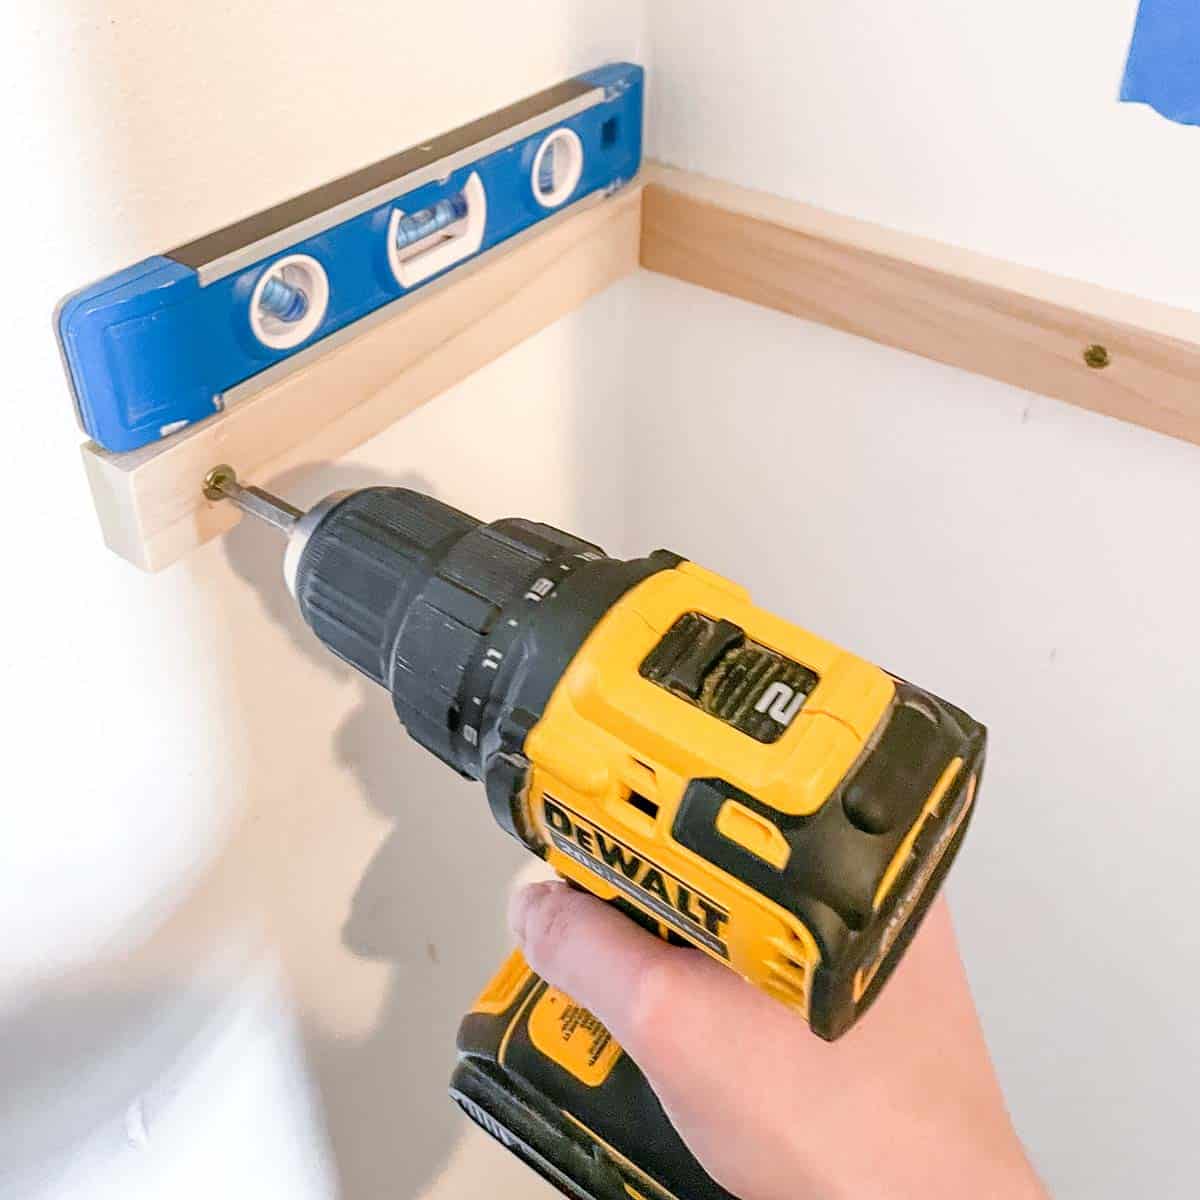 attaching the side of the DIY shelf bracket to the wall